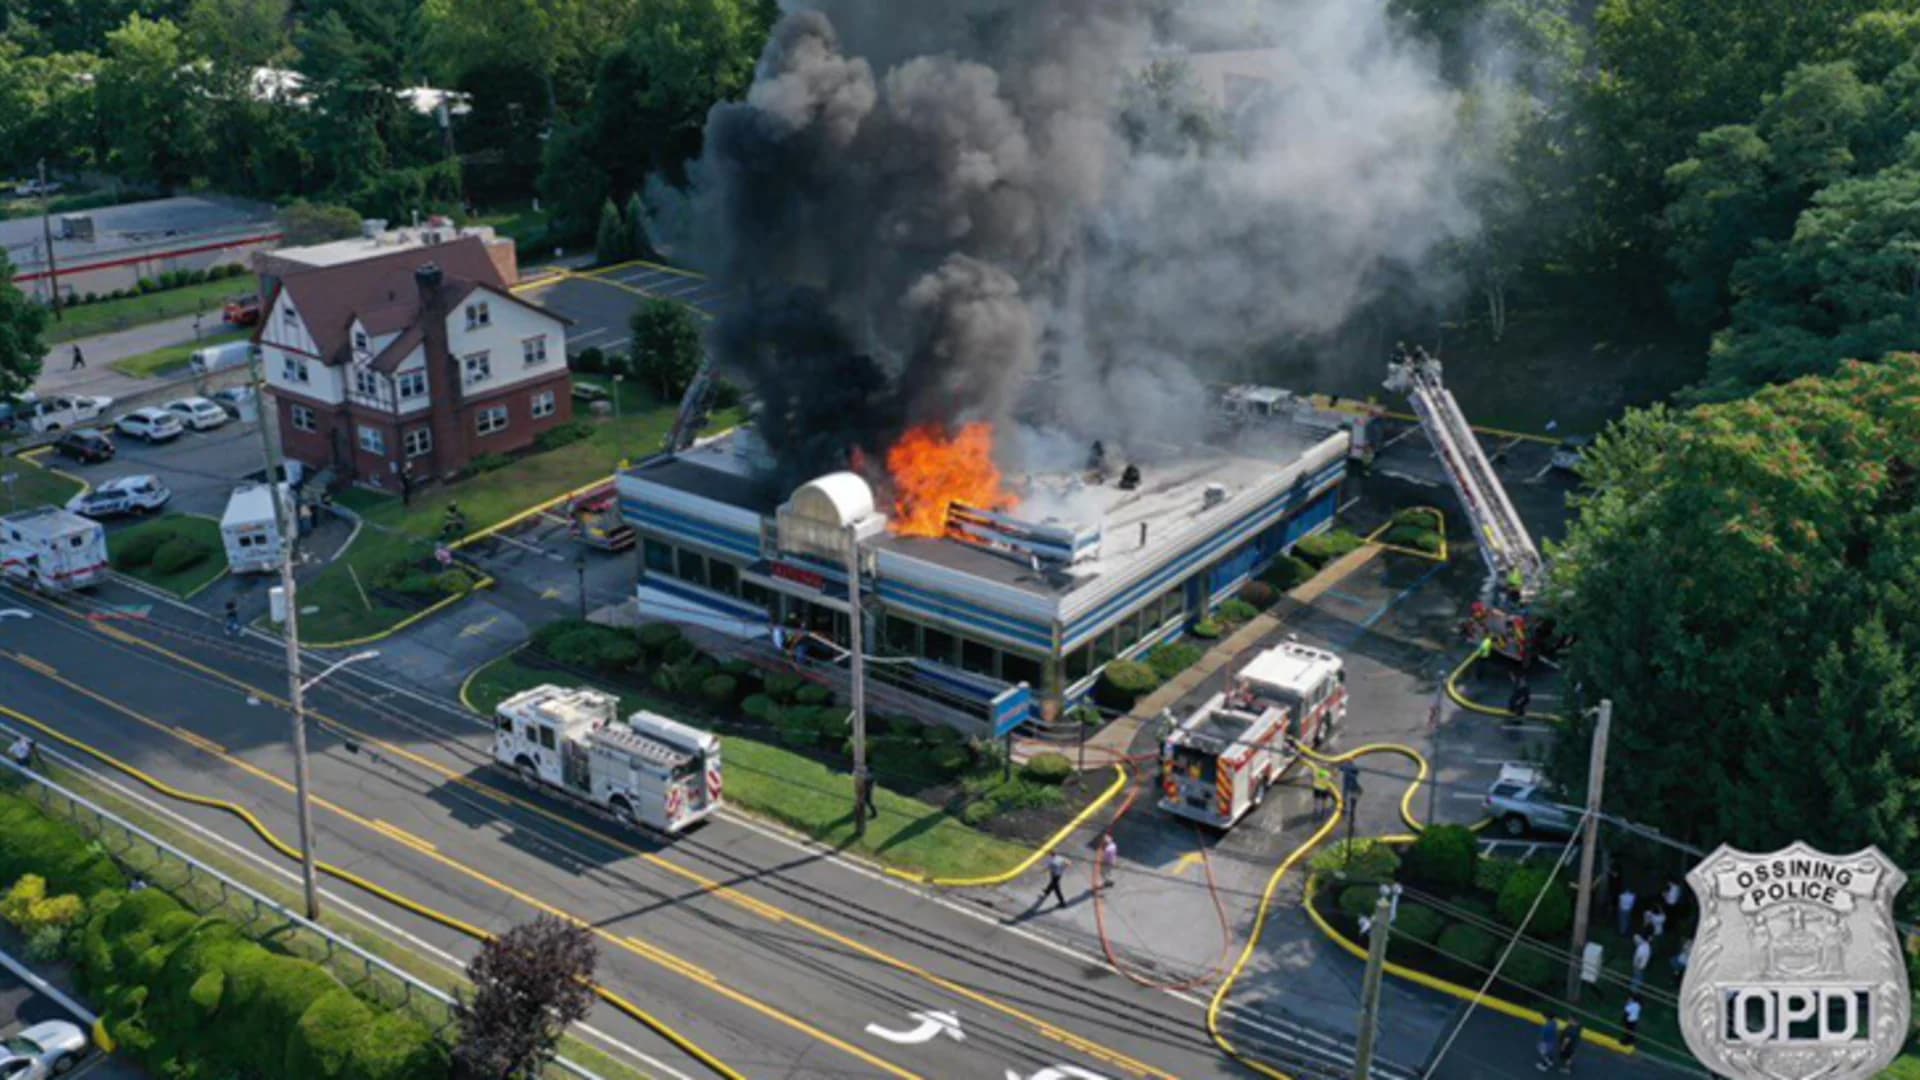 Popular diner goes up in flames in Briarcliff Manor